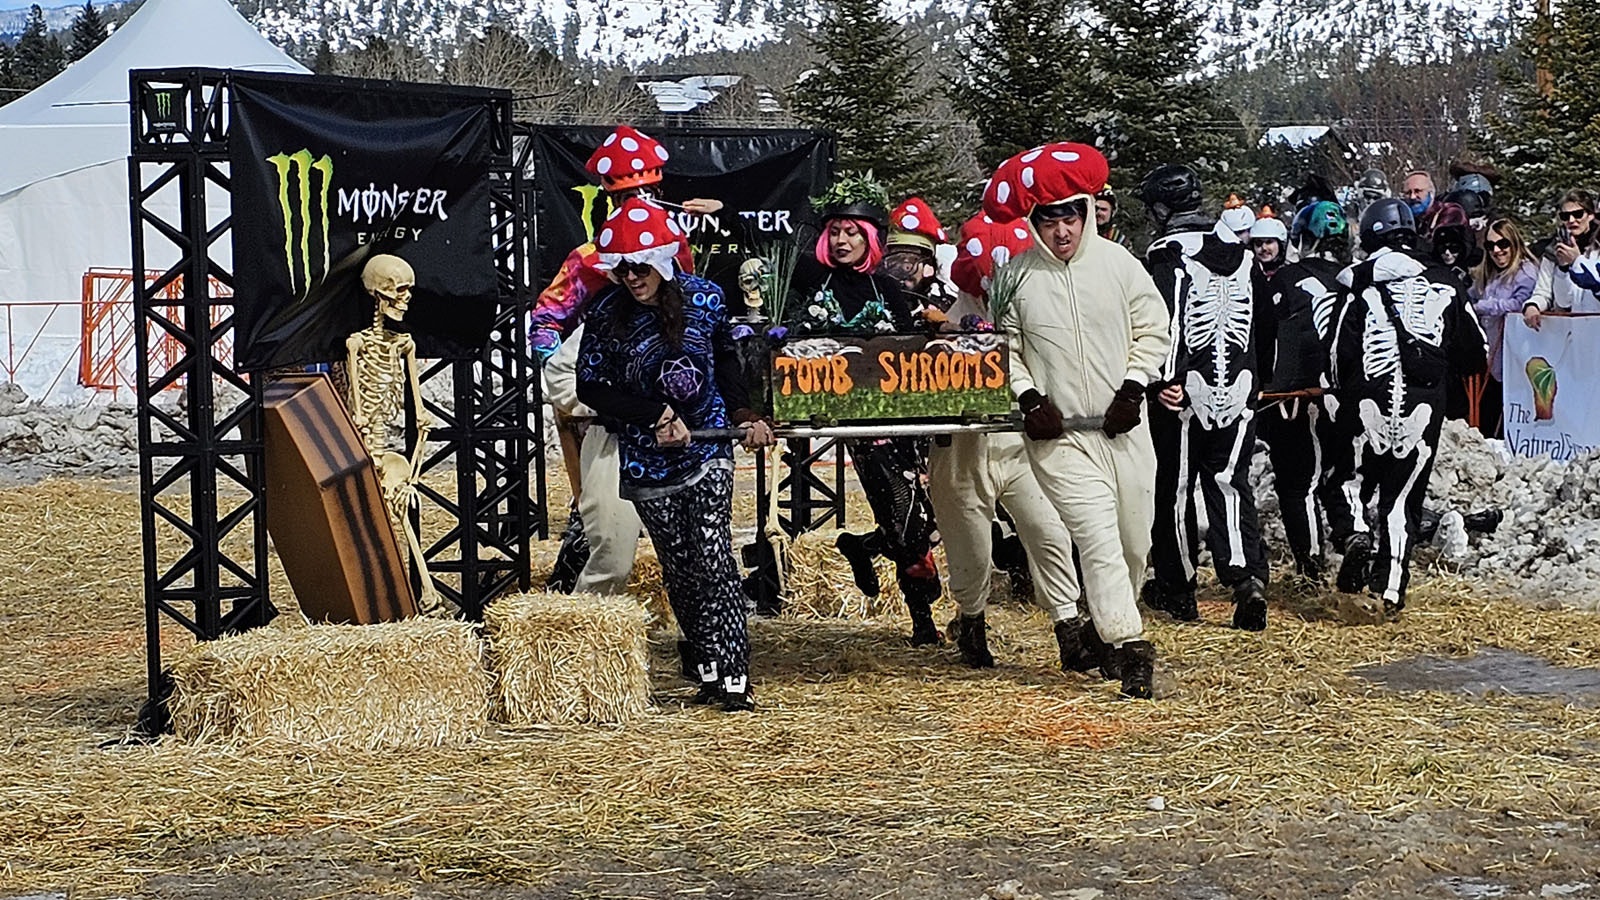 The Tomb Shrooms navigate the crazy eight the best, and ultimately were the top racing team during the Coffin Races at Frozen Dead Guy Days.